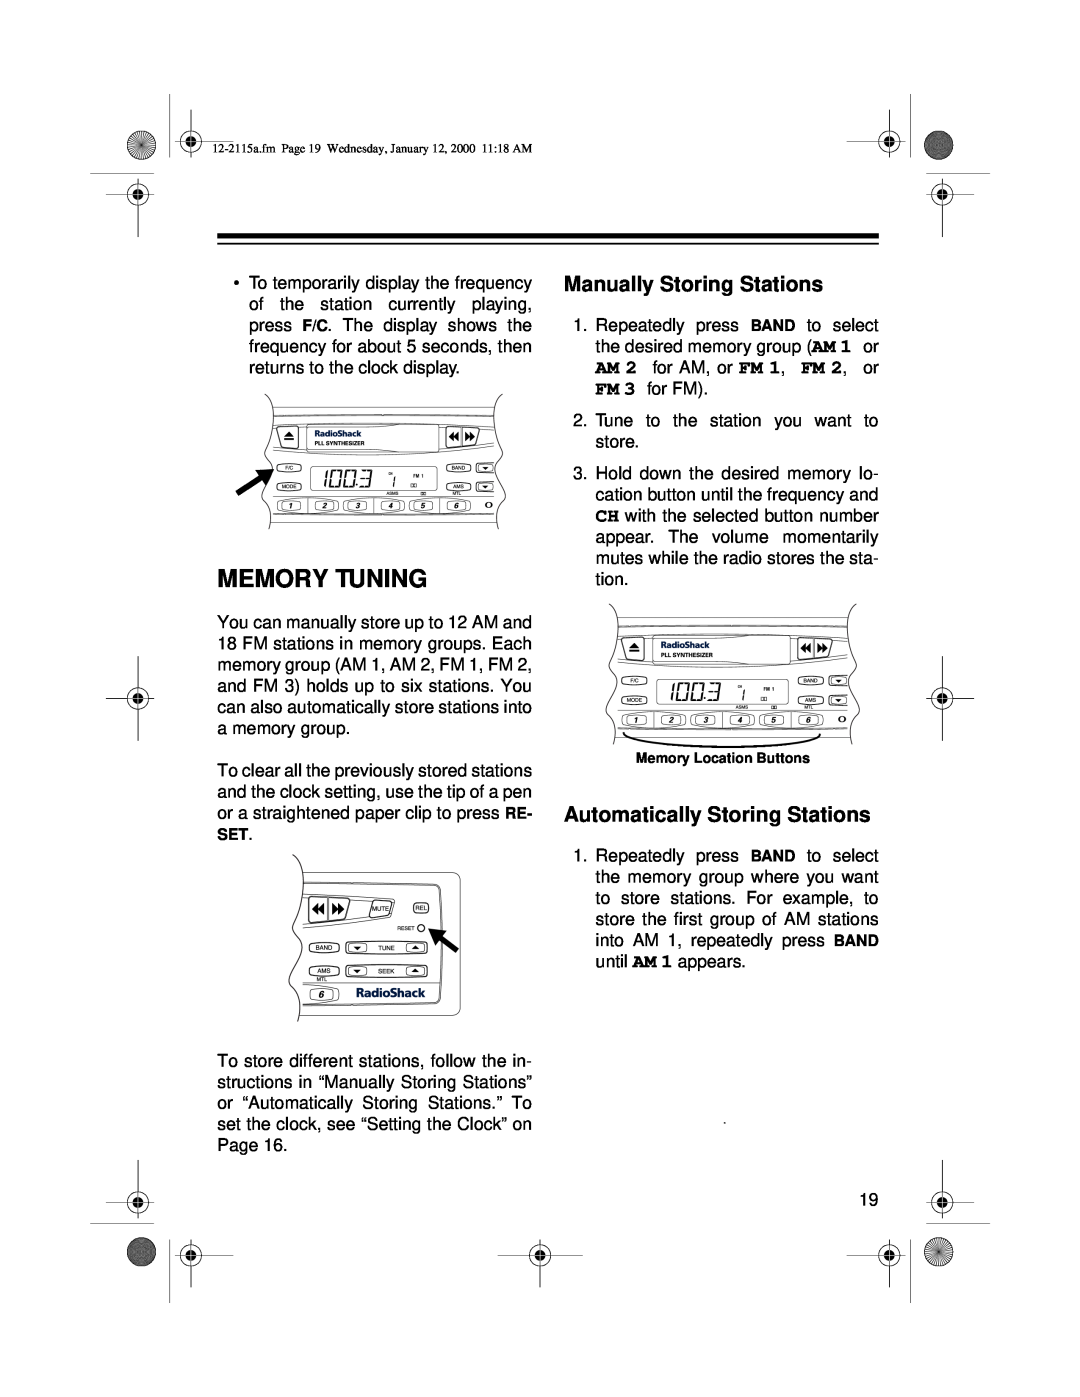 Radio Shack AM/FM Stereo Cassette owner manual Memory Tuning, Manually Storing Stations, Automatically Storing Stations 